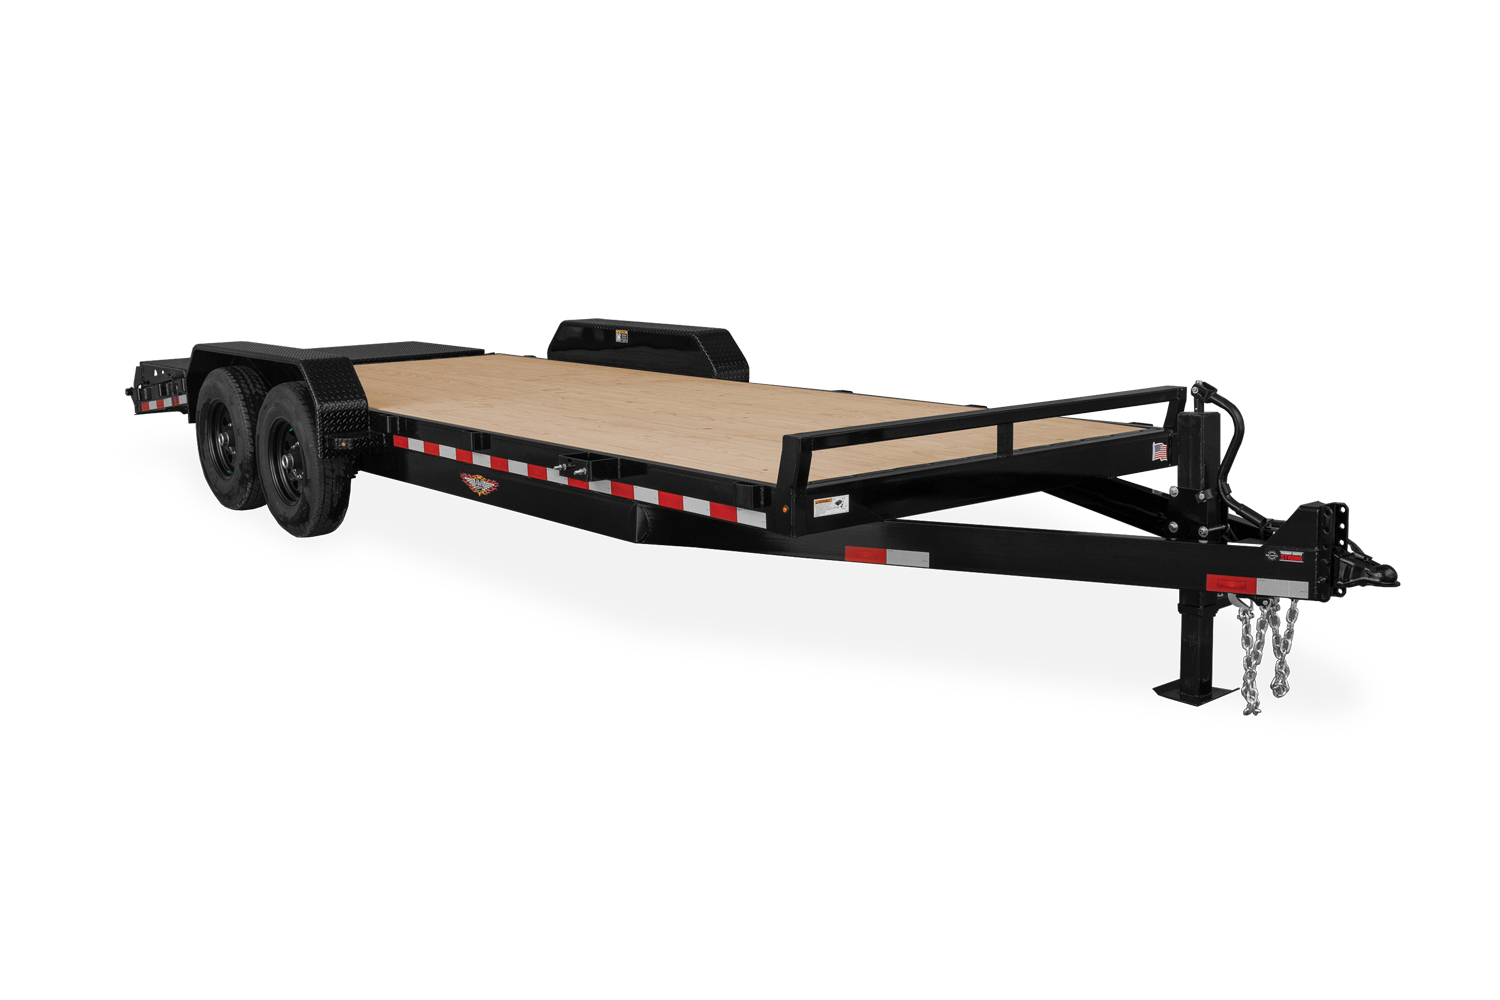 Forbyde announcer Anholdelse Super Deluxe Ramp Industrial Equipment Trailer by H&H Trailers